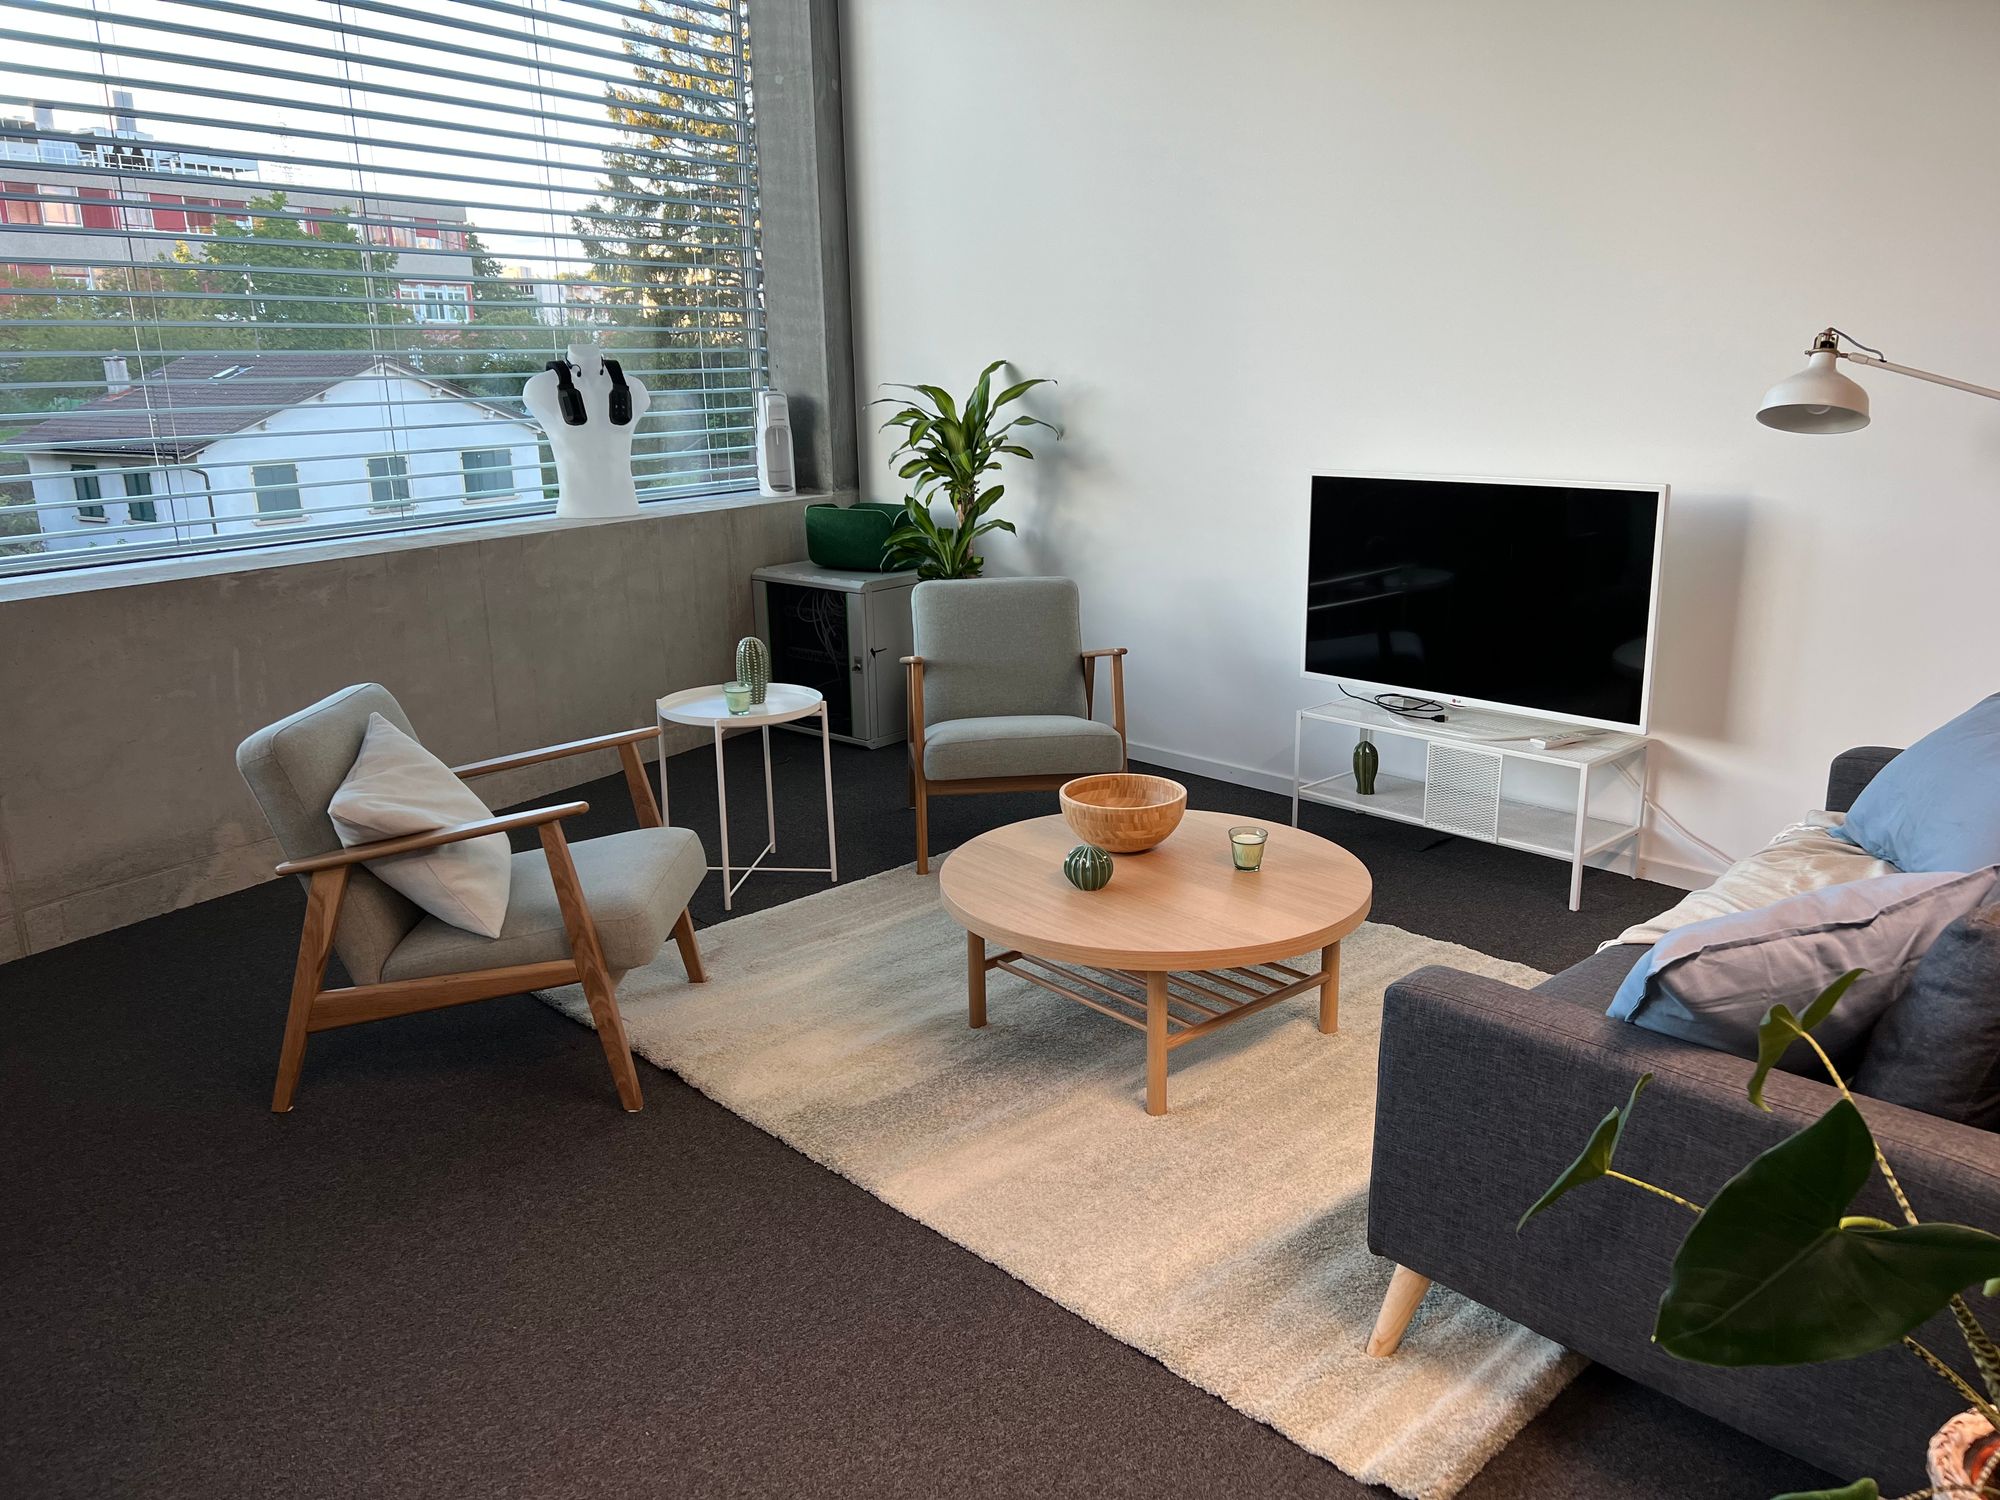 Our offices are located in the North of Lausanne, in Croisette. Fully equipped, with monitors for everyone, and a 3D printer. Additionally, there is a nice kitchen, meeting rooms, and restaurants nearby.